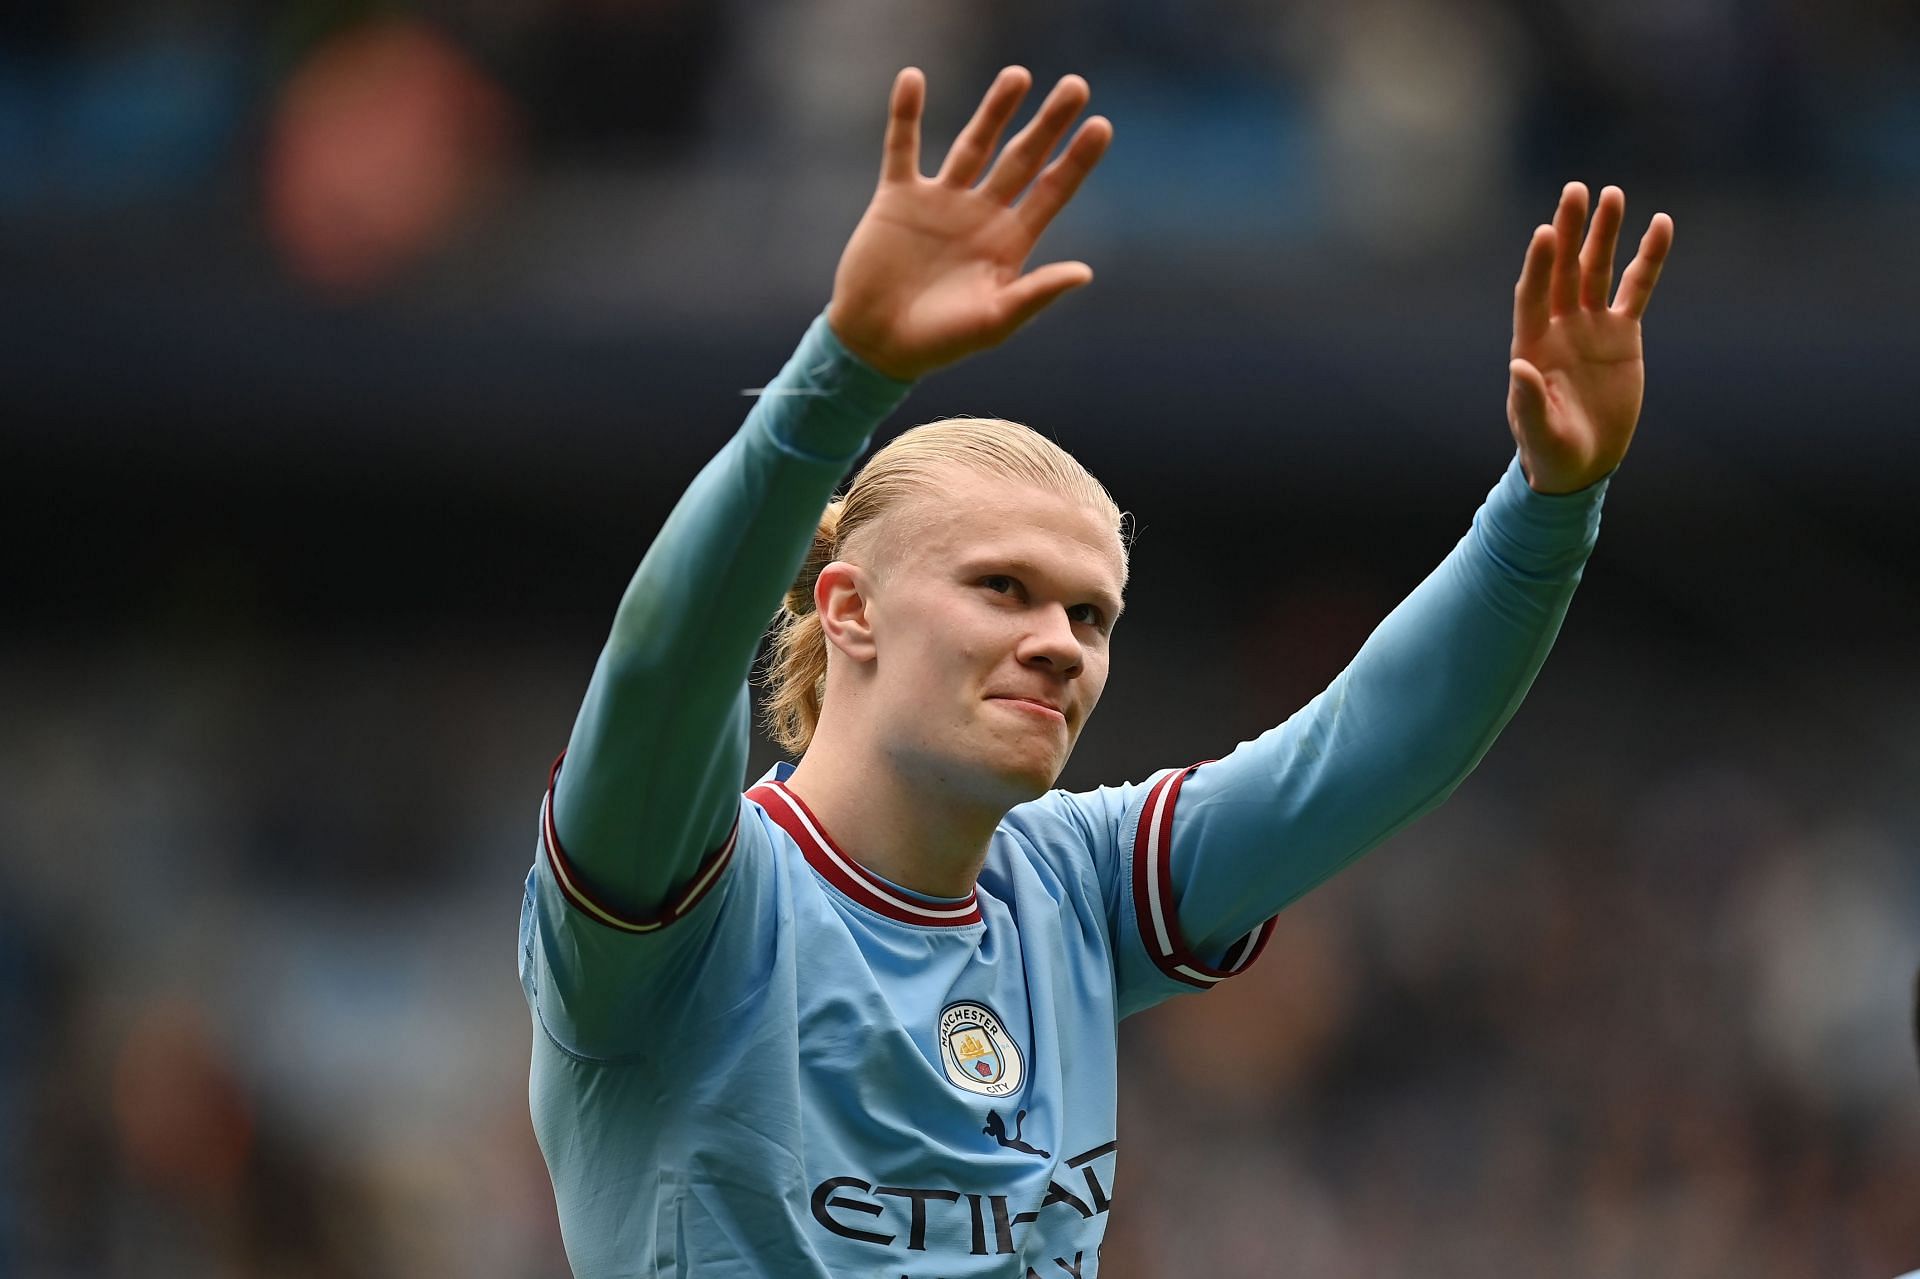 Erling Haaland&#039;s debut season for Manchester City has been a roaring success personally